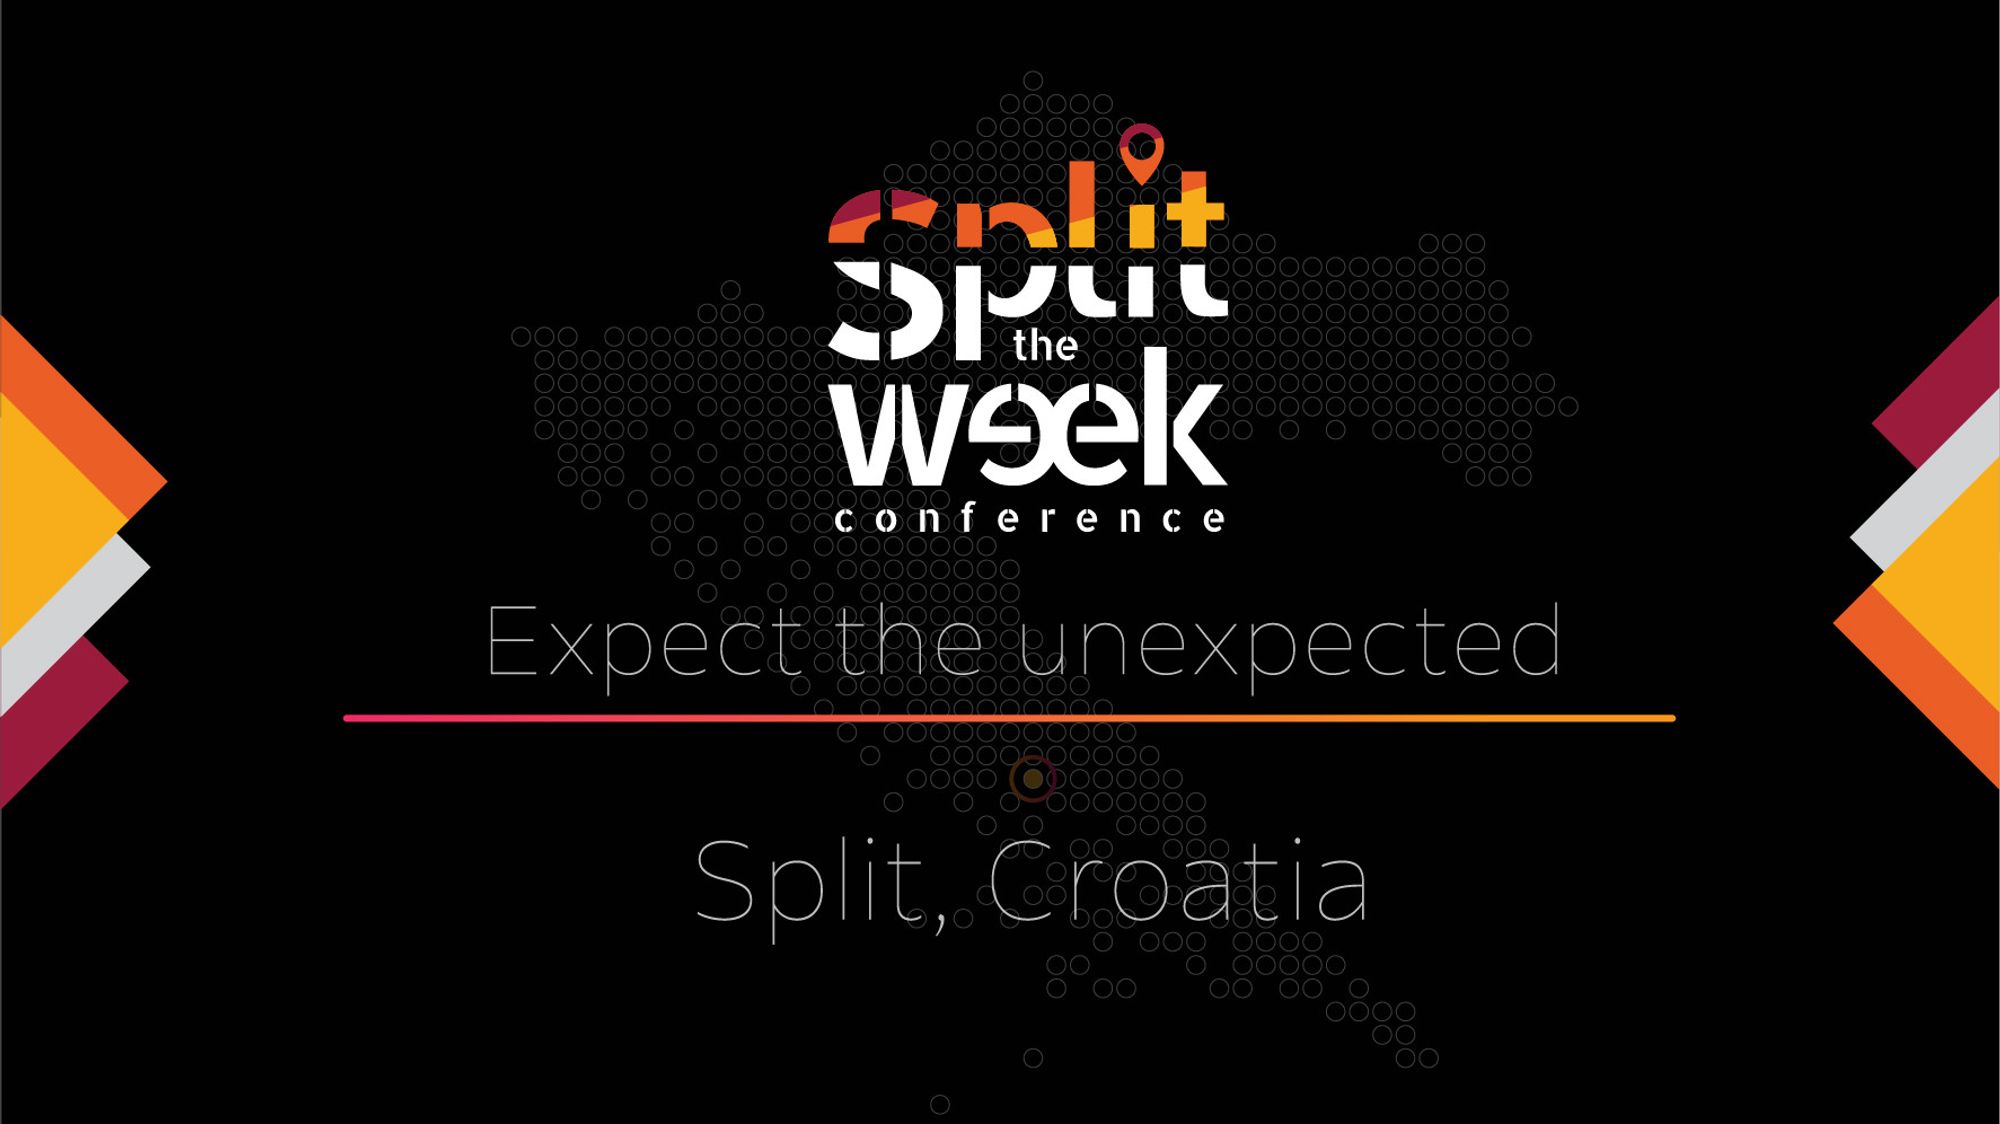 Split the week conference